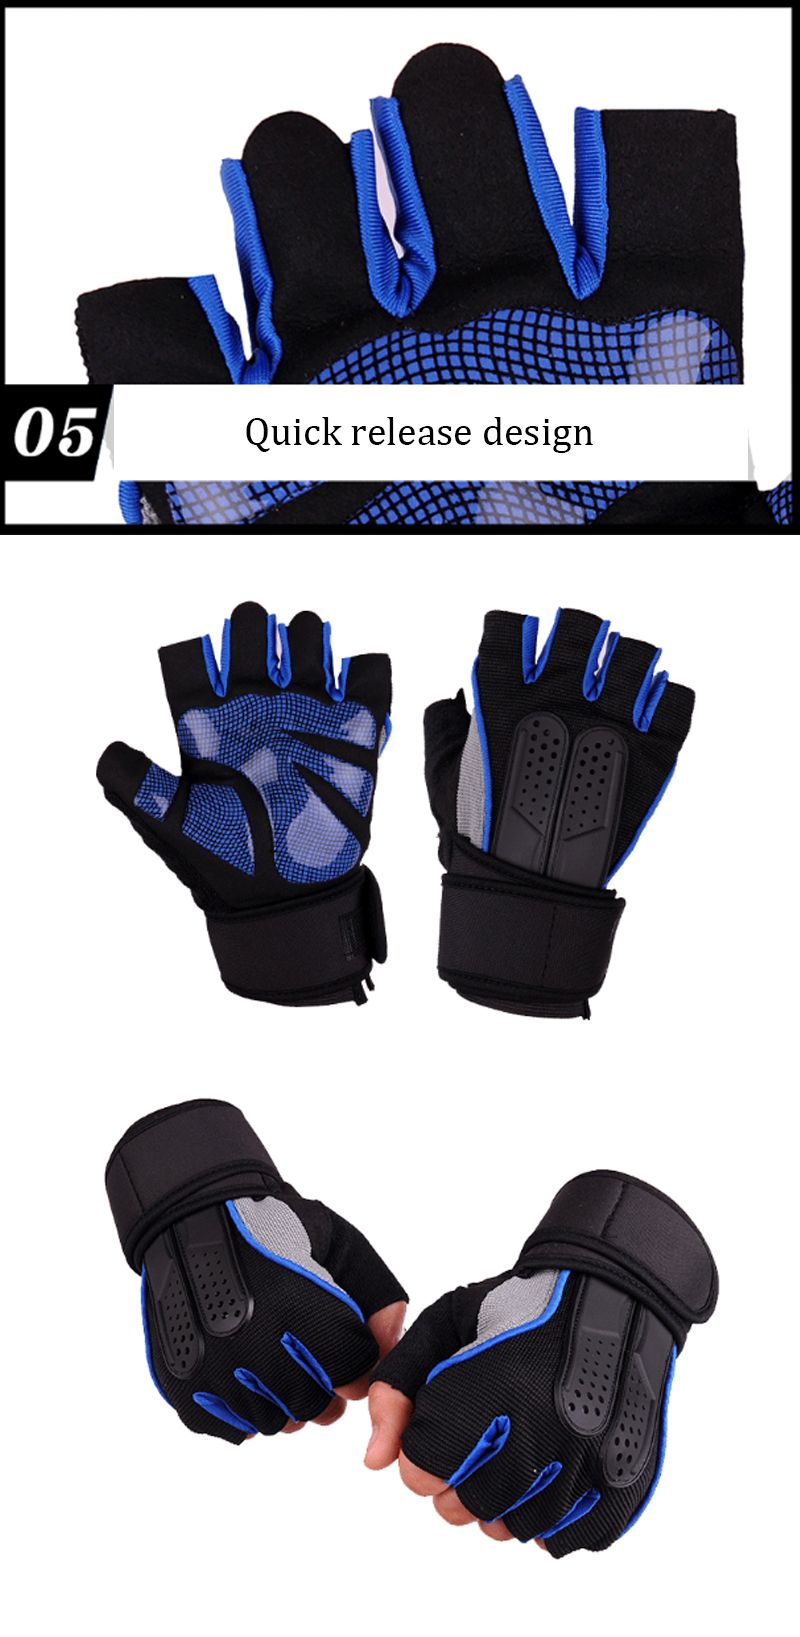 1-Pair-KALOAD-Tactical-Glove-Rubber-Military-Sports-Climbing-Cycling-Fitness-Anti-skid-Gloves-Half-F-1452699-2